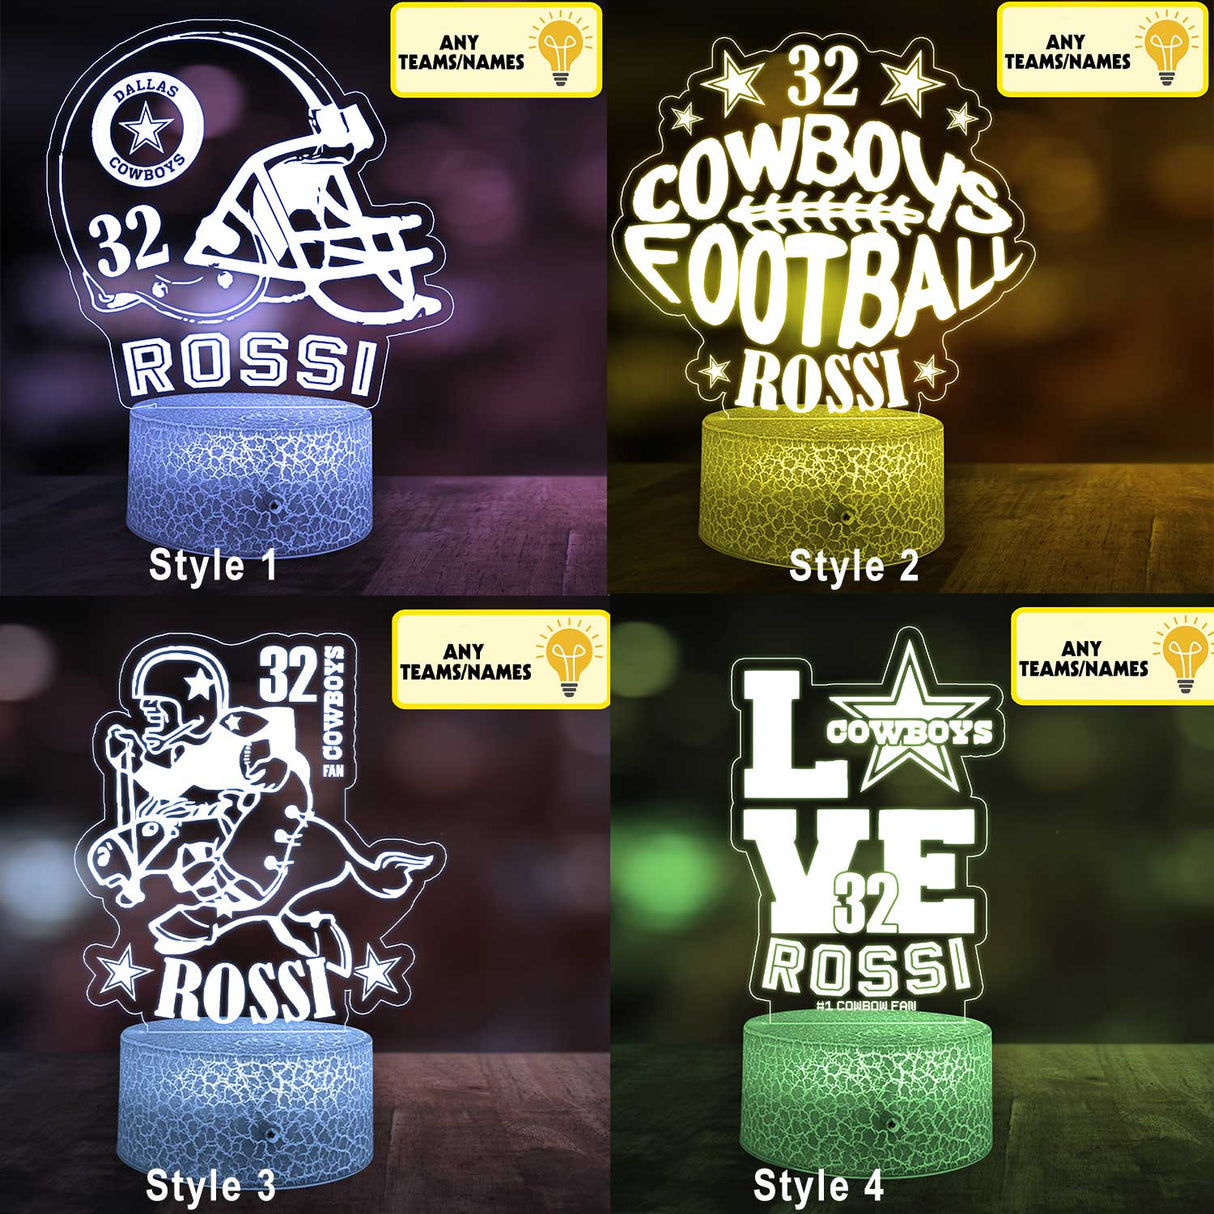 Custom FootBall Cowboys Night Lights - Personalized FootBall Cowboys Acrylic Table LED Lamp For Kids, Teens Gifts